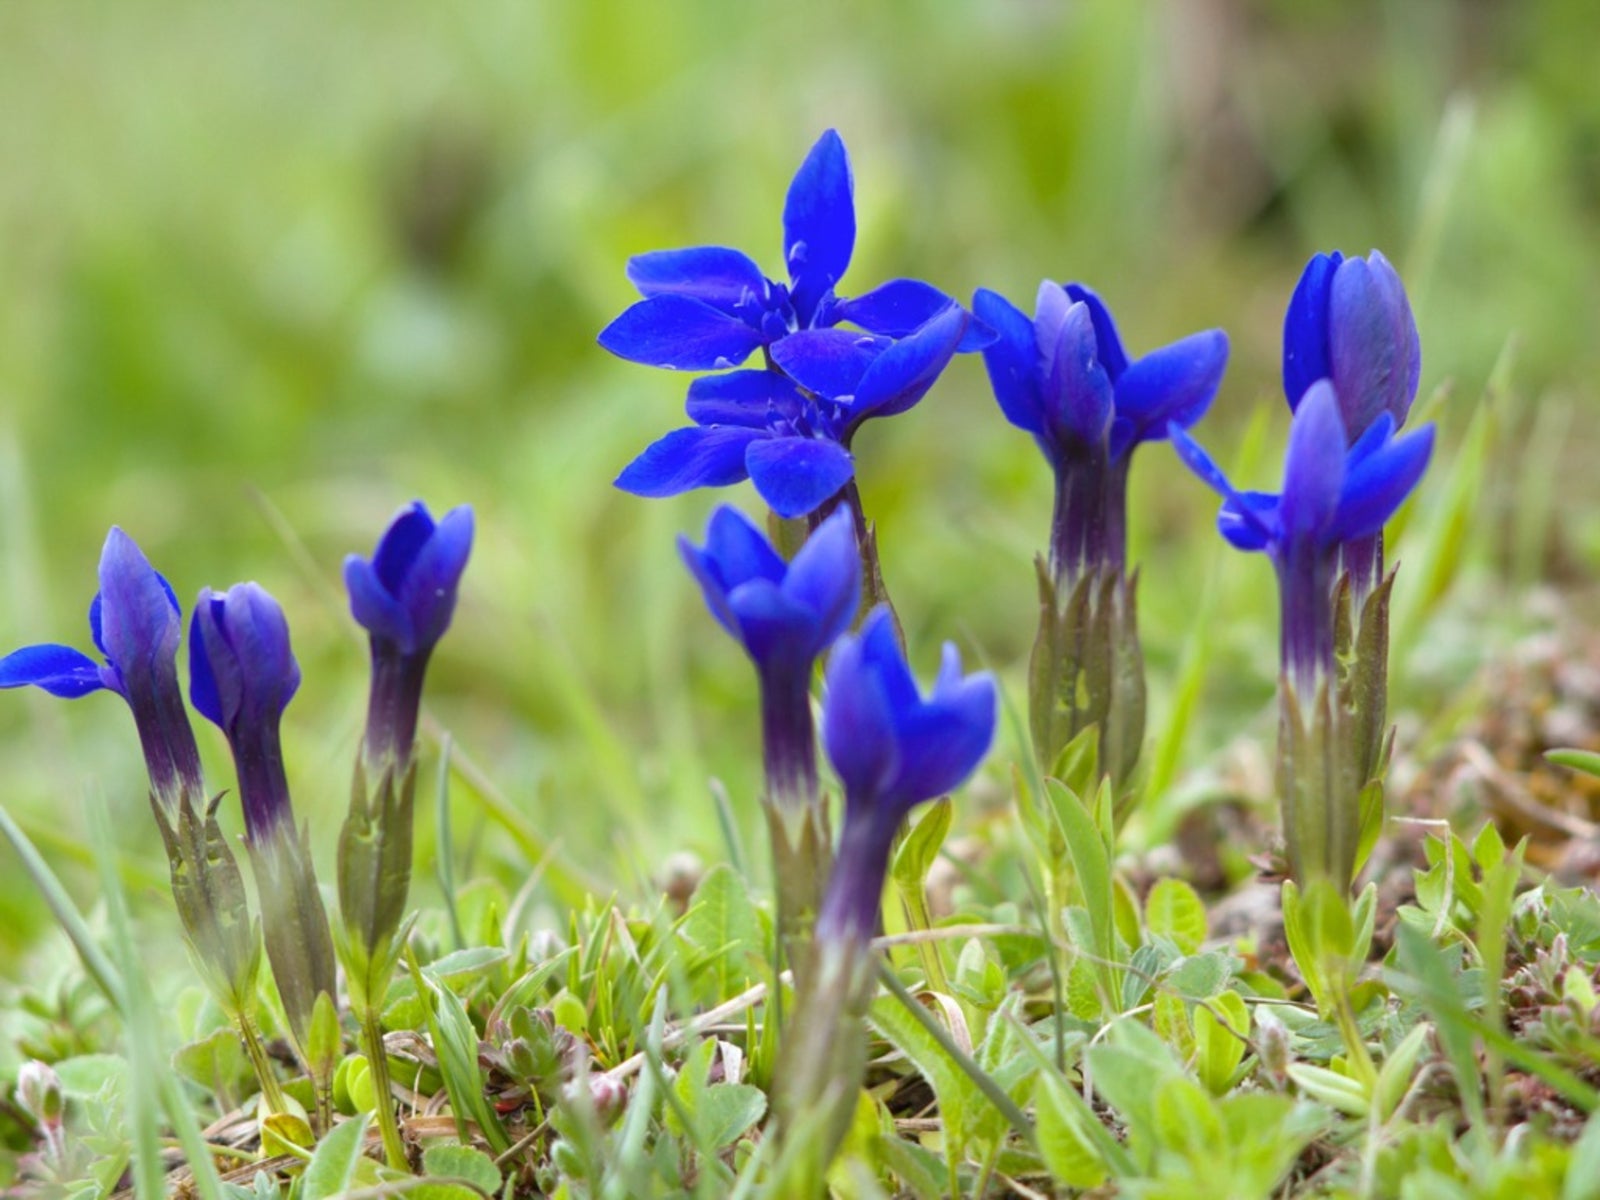 gentian care - information on how to plant gentian wildflowers